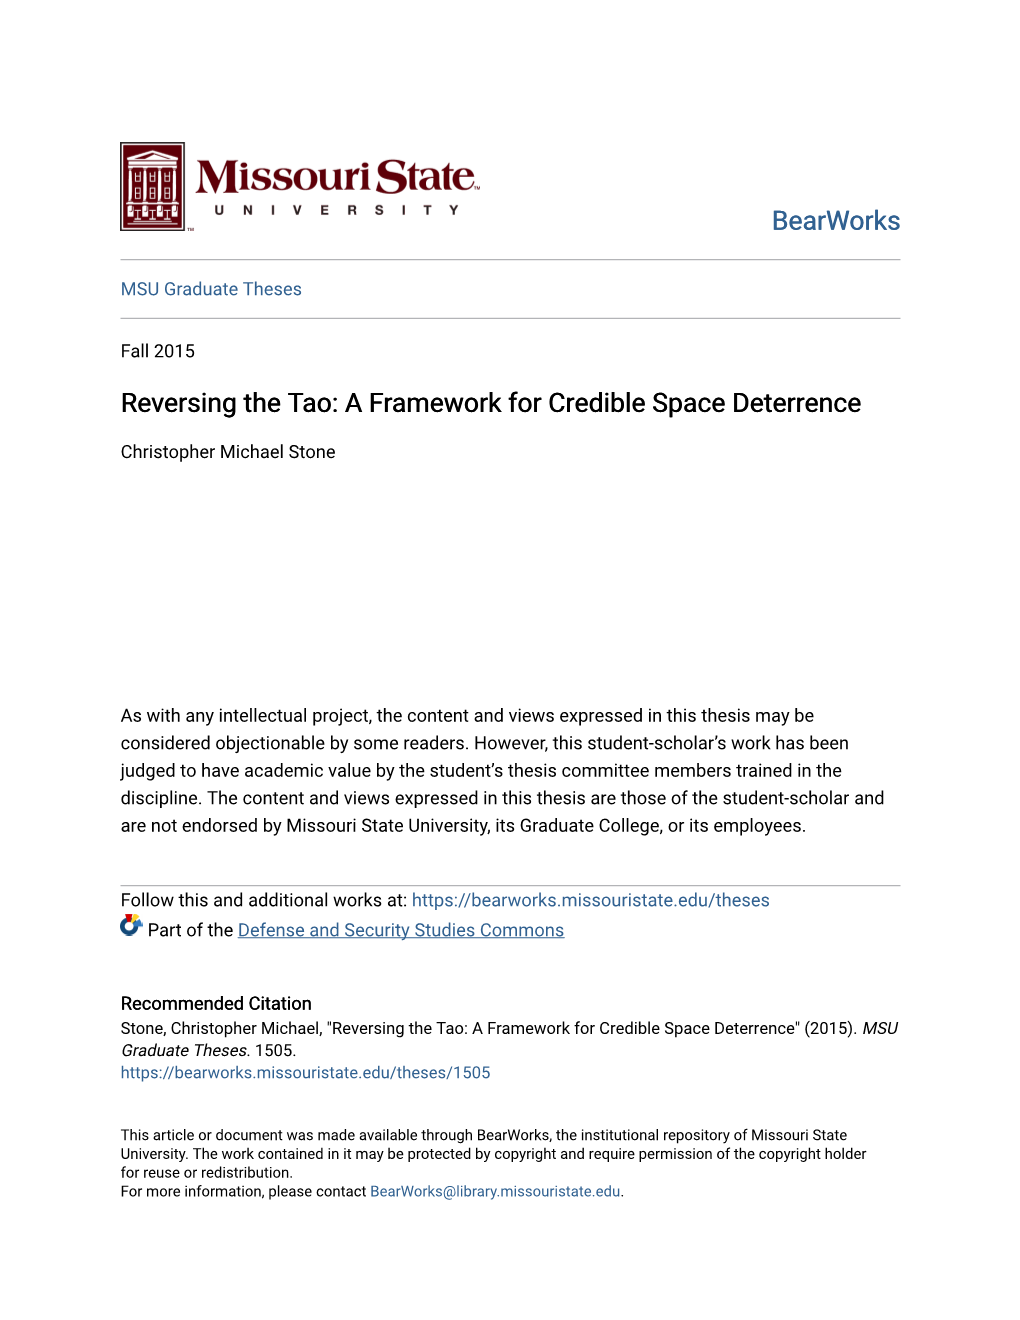 Reversing the Tao: a Framework for Credible Space Deterrence